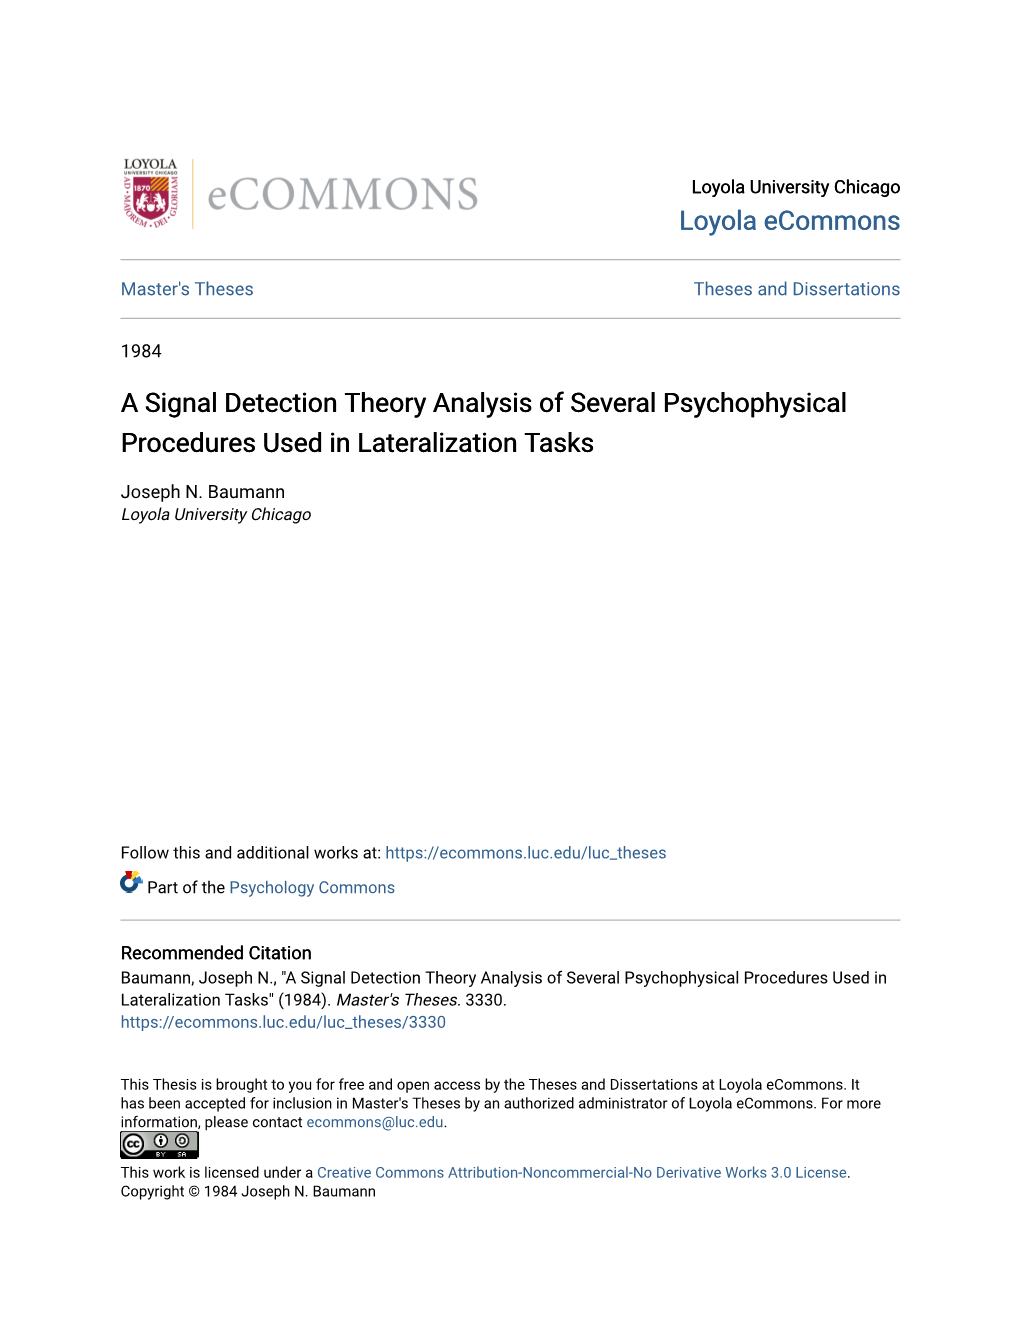 A Signal Detection Theory Analysis of Several Psychophysical Procedures Used in Lateralization Tasks